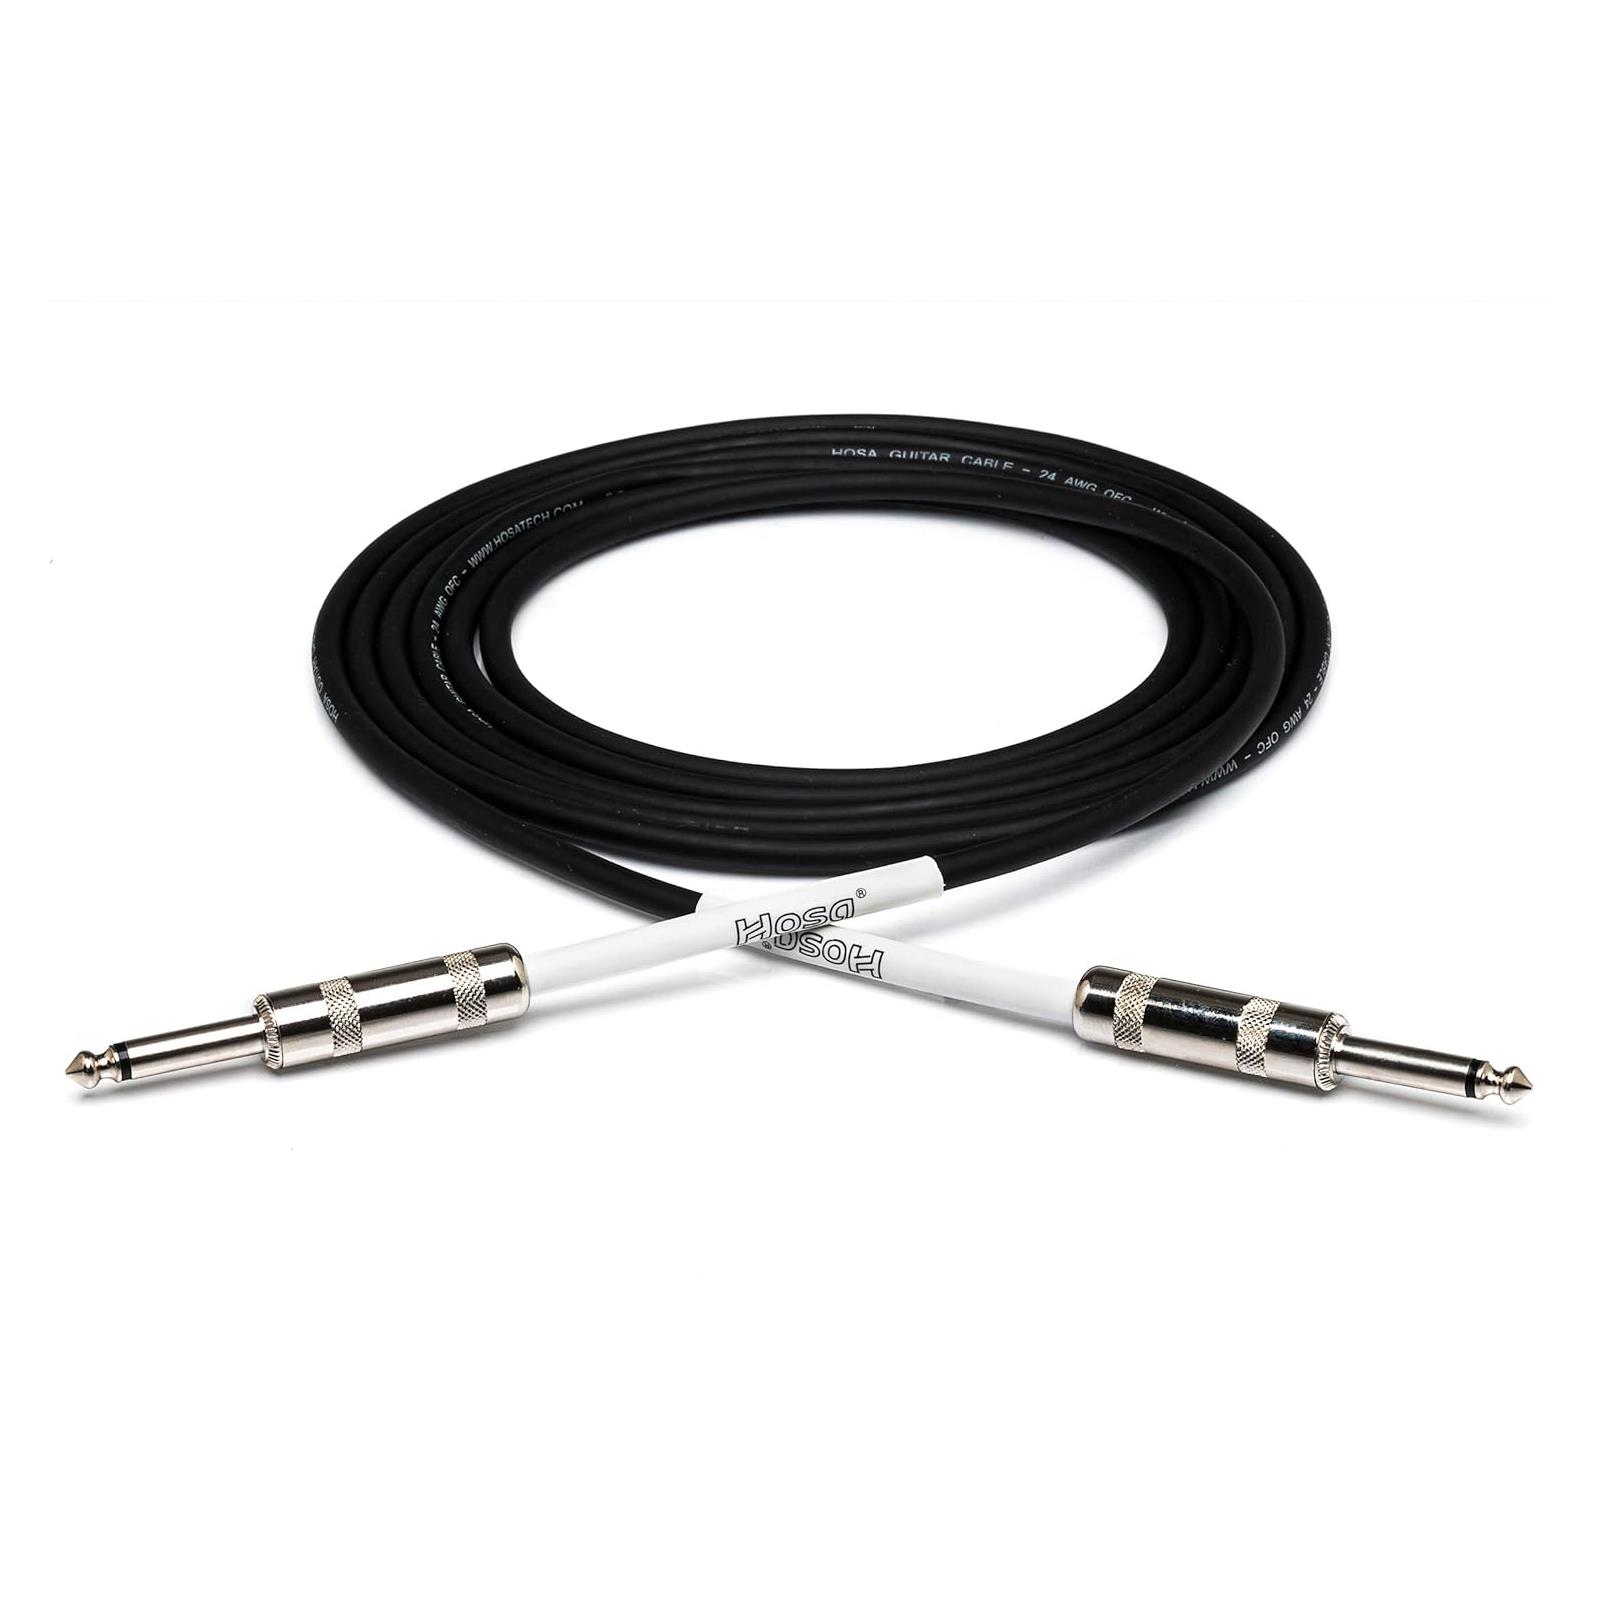 Guitar Cable, Hosa Straight to Same, 20 ft